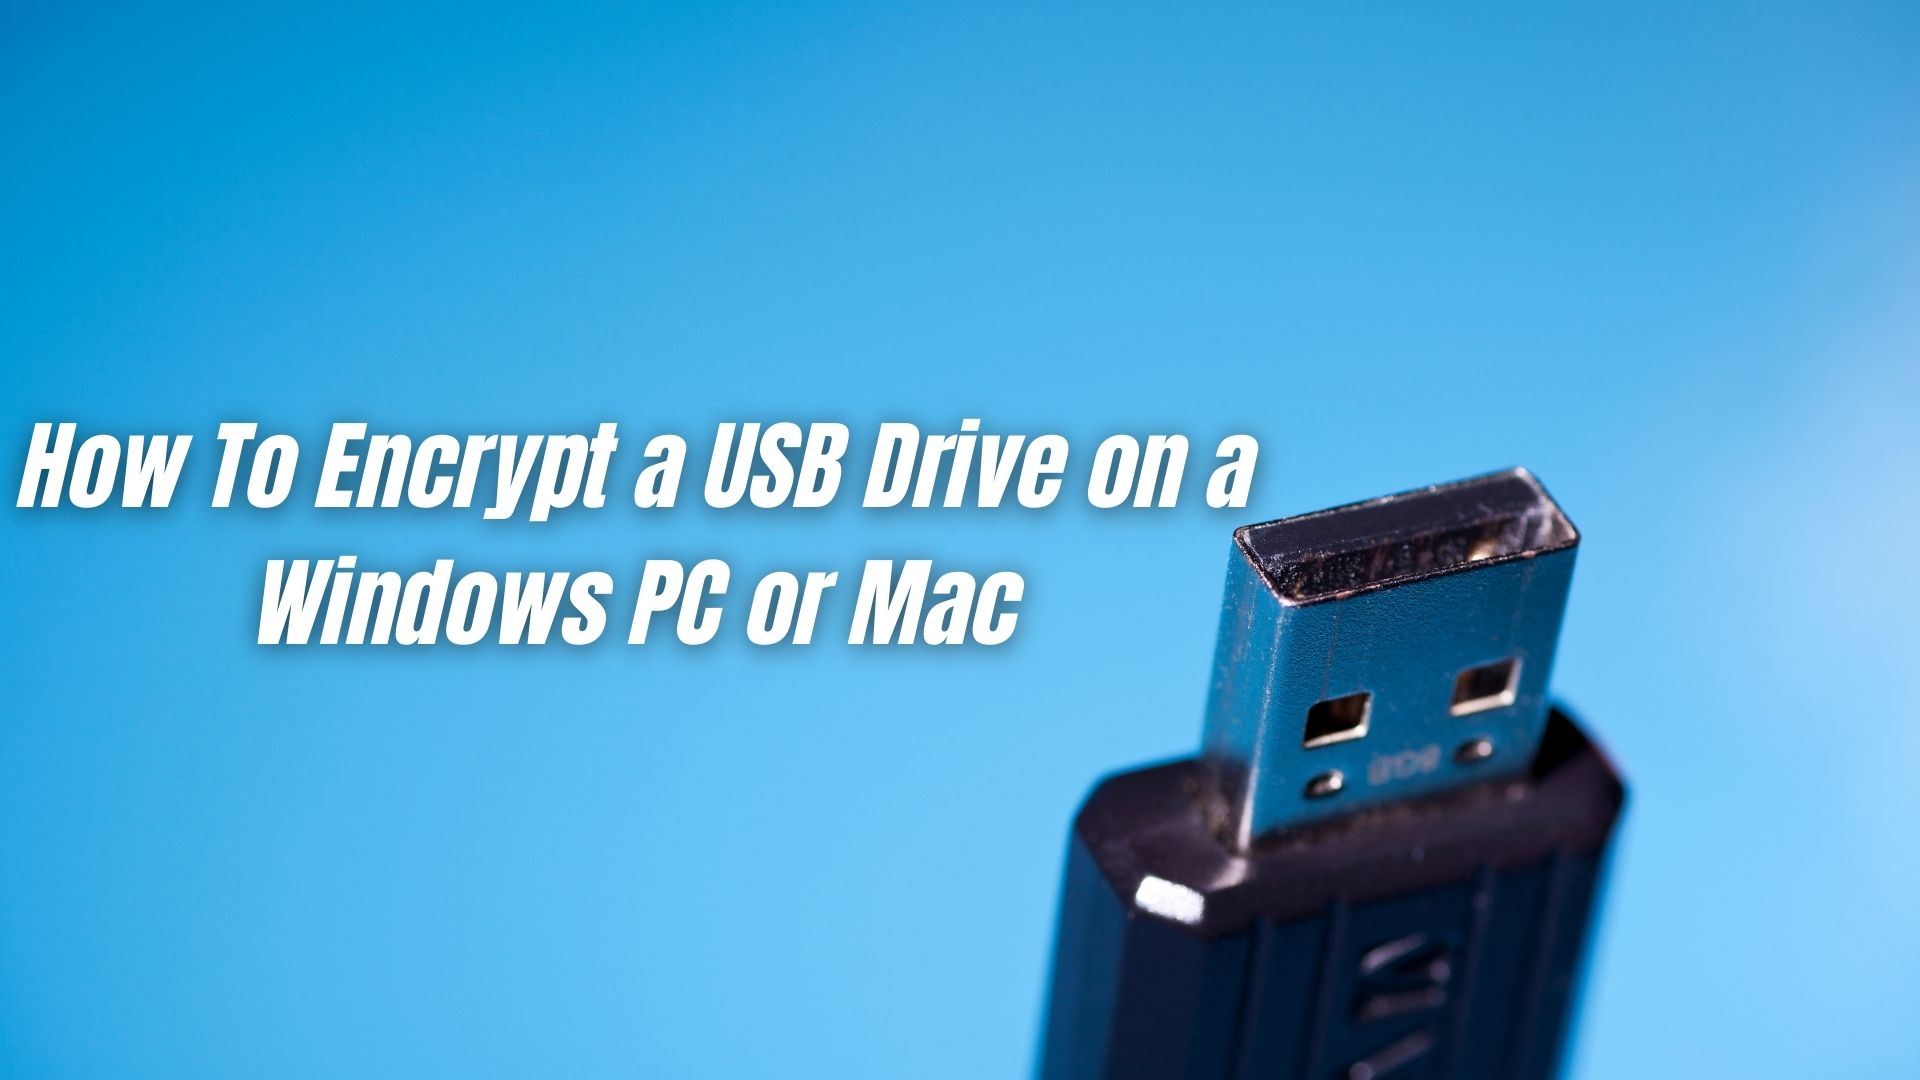 How To Encrypt a USB Drive on a Windows PC or Mac